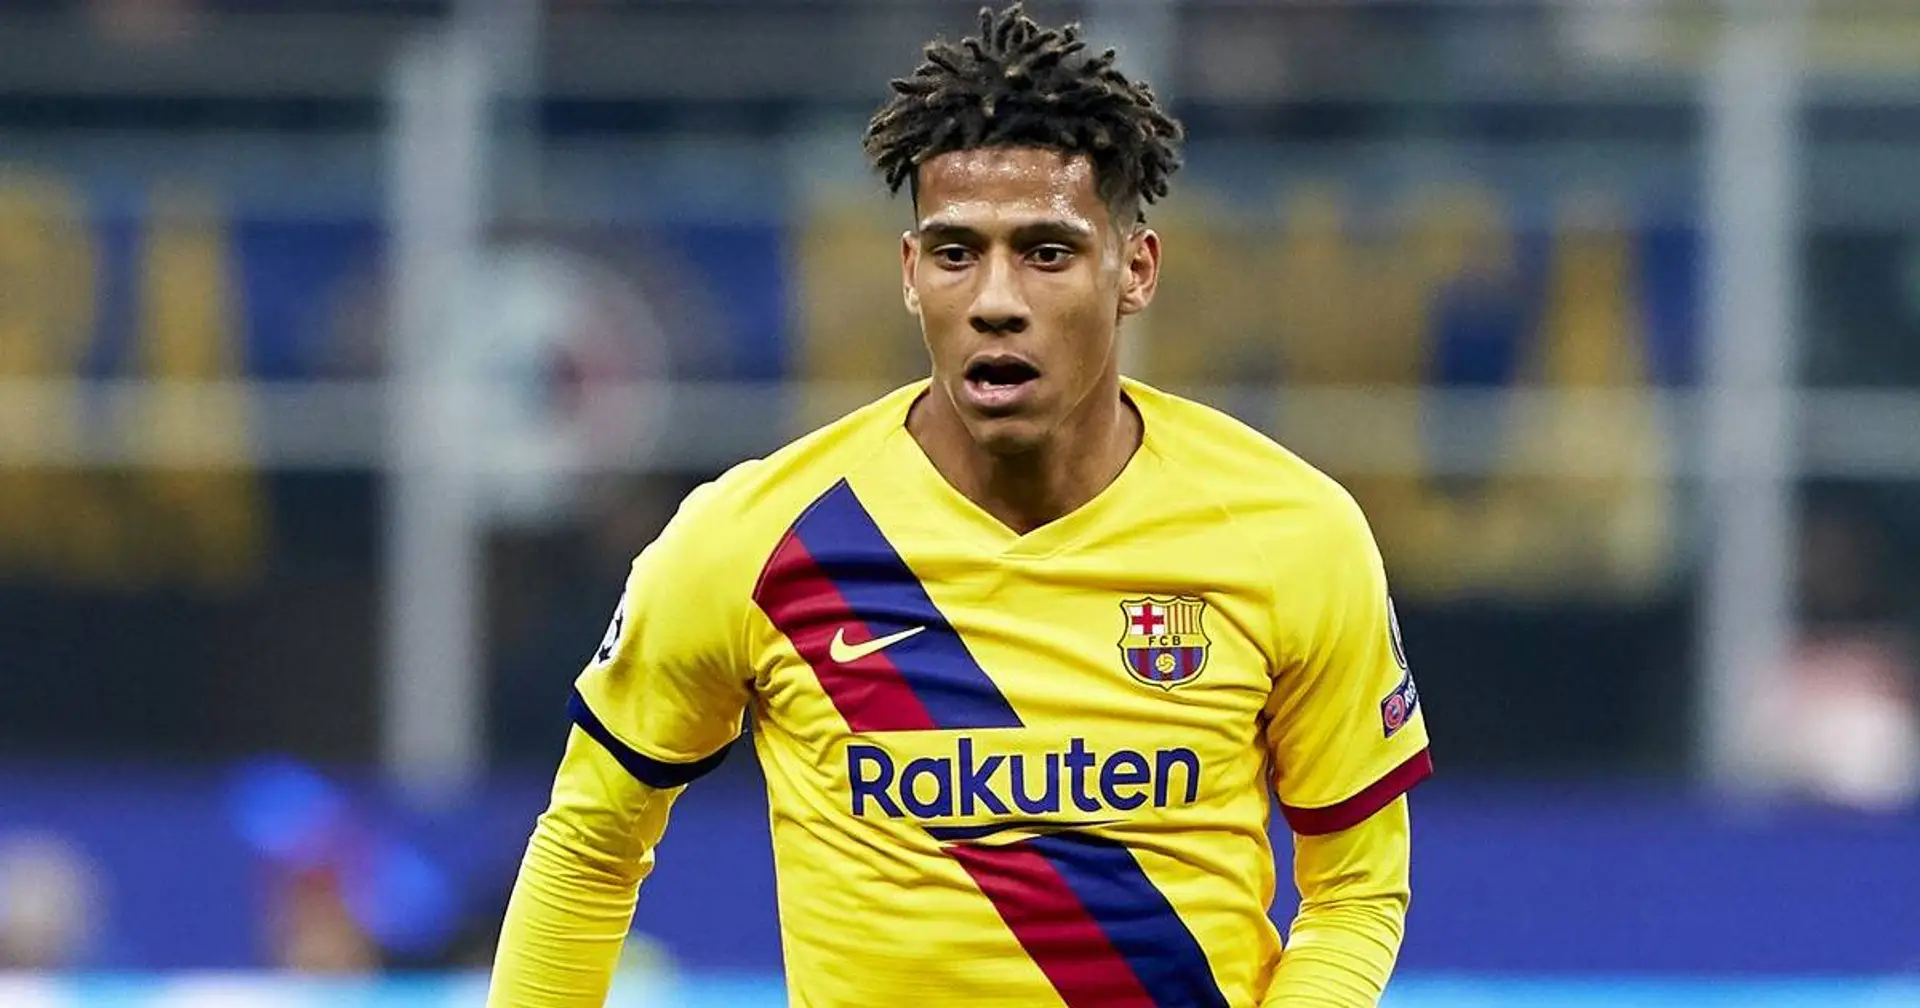 'What he lacks is humility': Todibo's former agent goes hard on struggling starlet